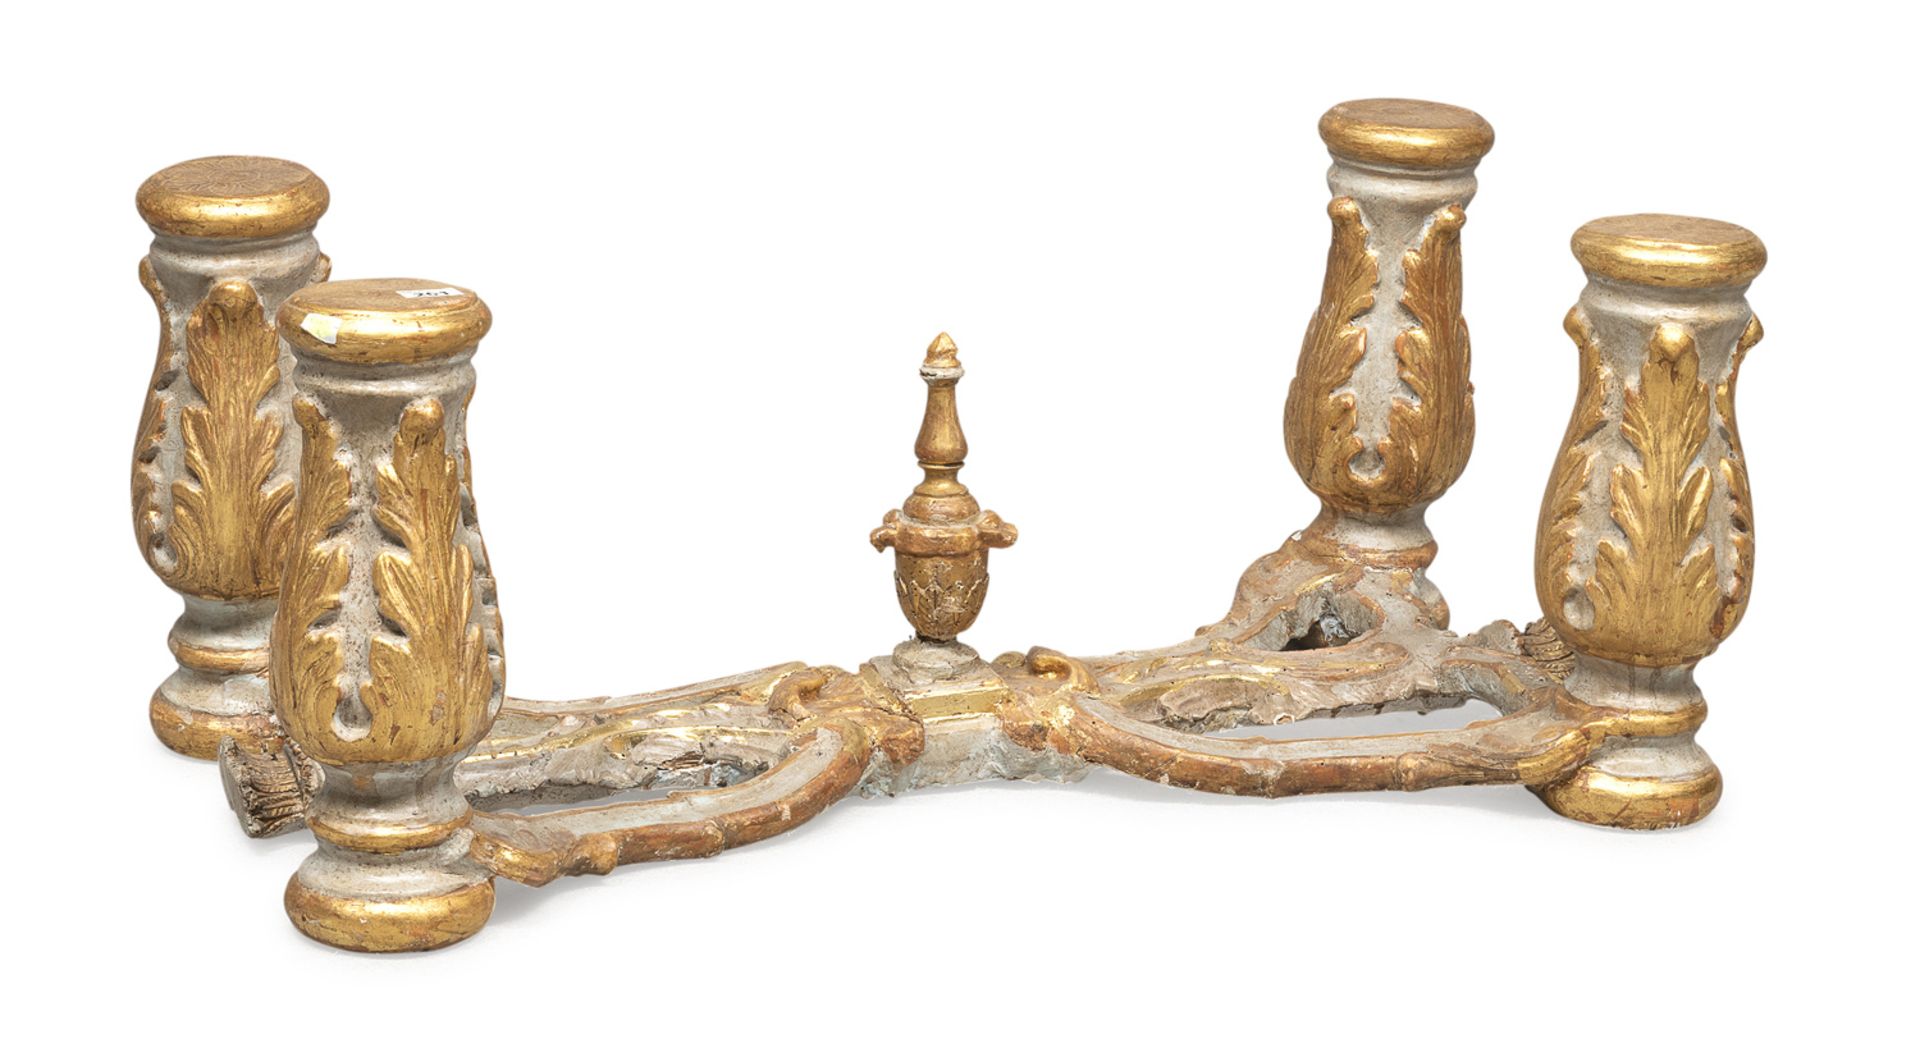 LACQUERED WOODEN TABLE BASE ANTIQUE ELEMENTS